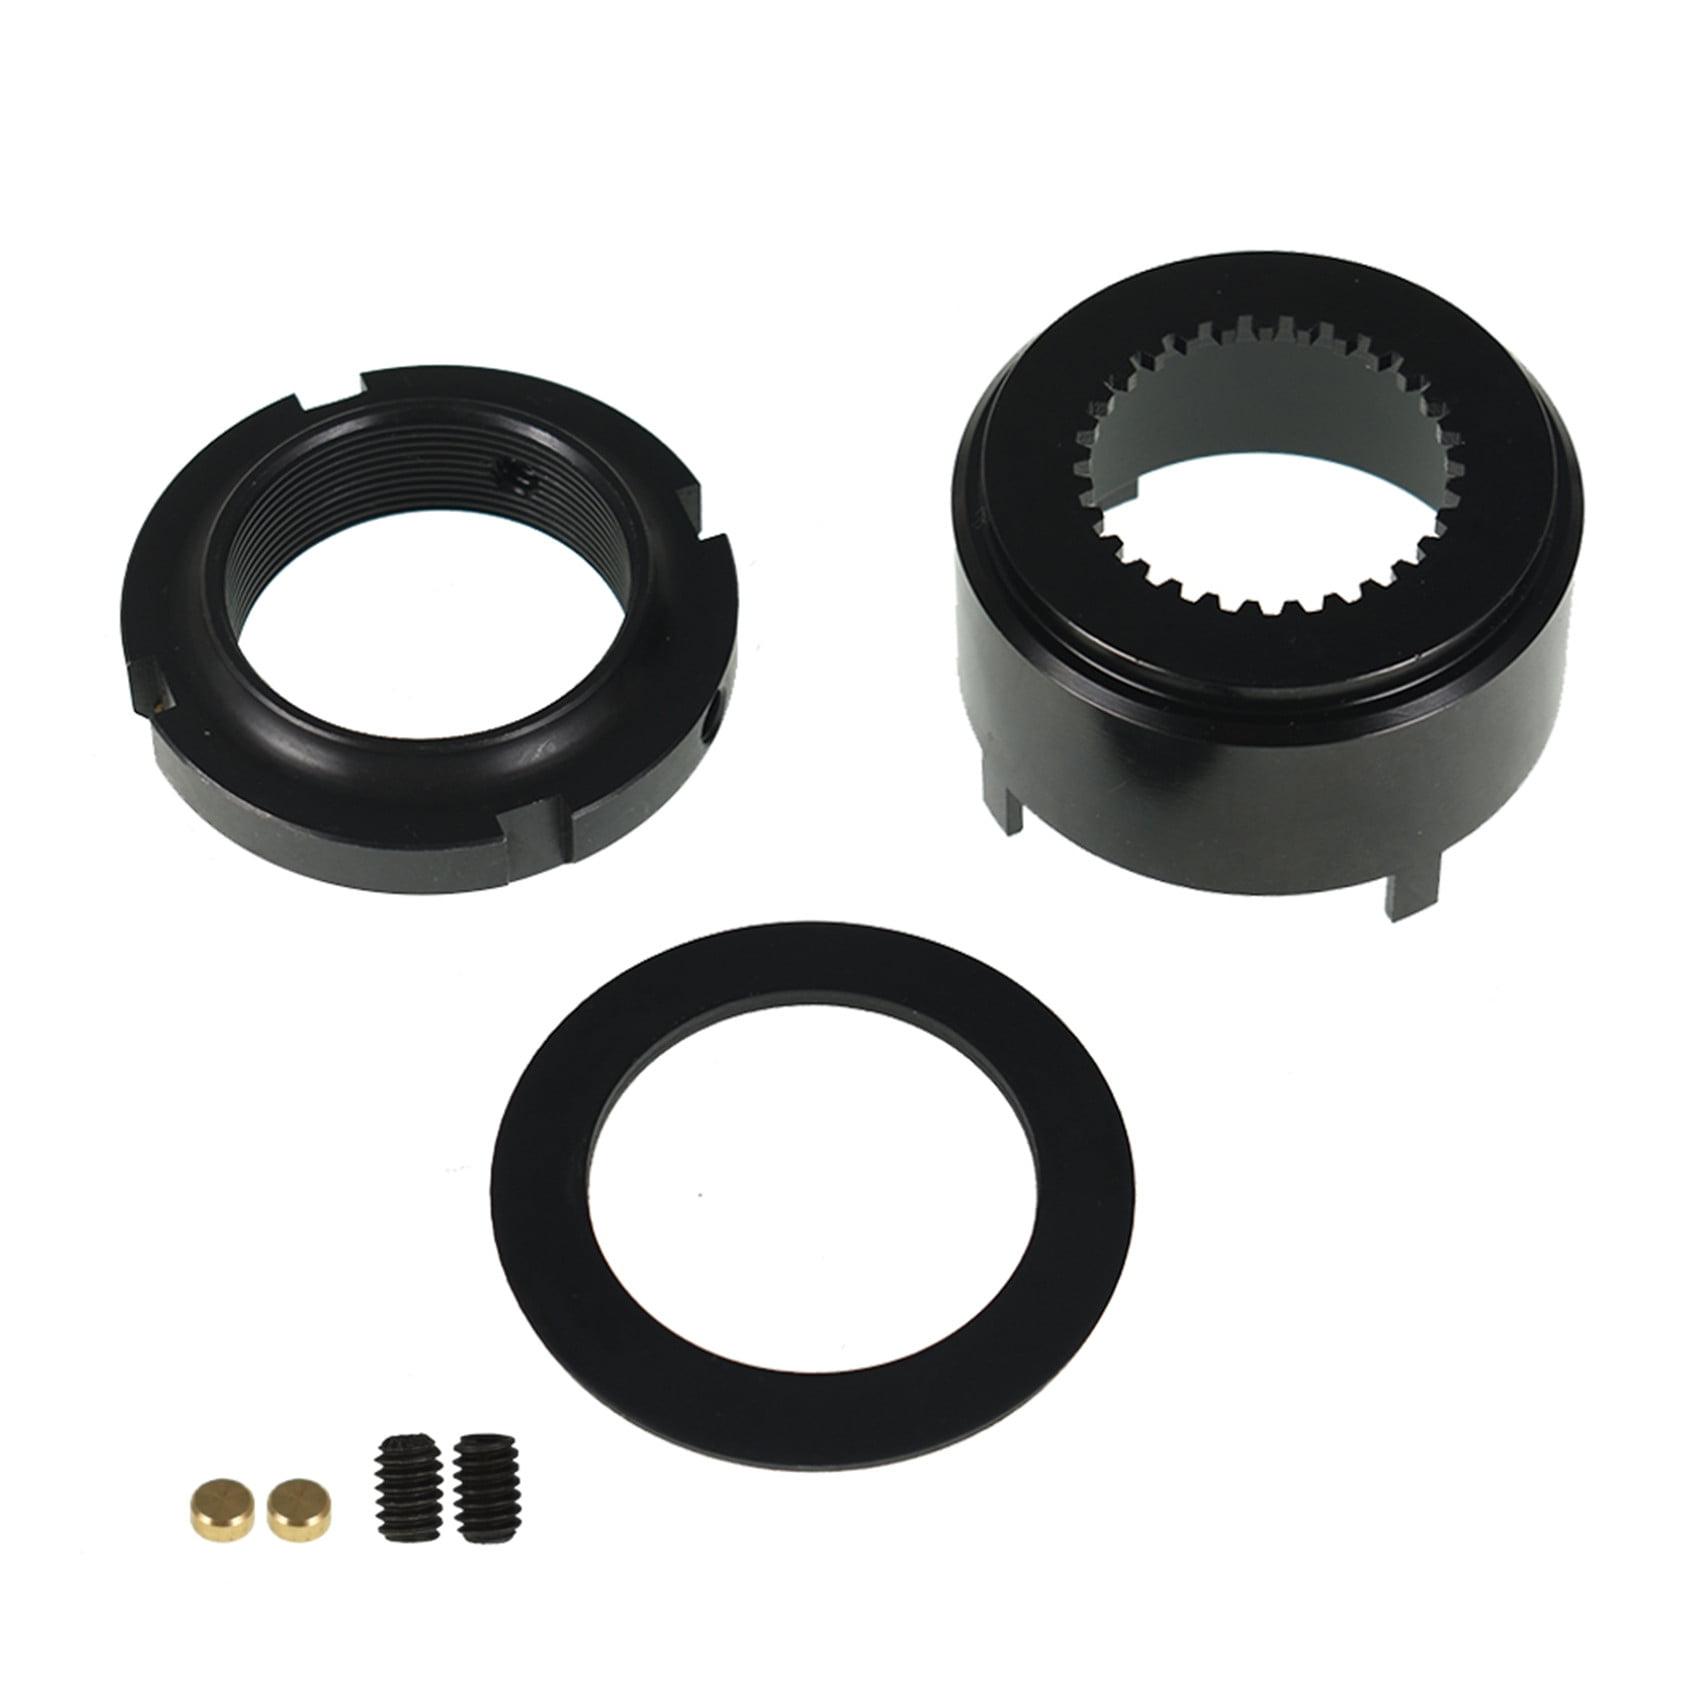 5th Gear Lock Nut Retainer Set Replacement for Dodge Ram 2500 3500 4WD 5.9L 6.7L NV4500 Transmission 1994-2005 5013887AA 